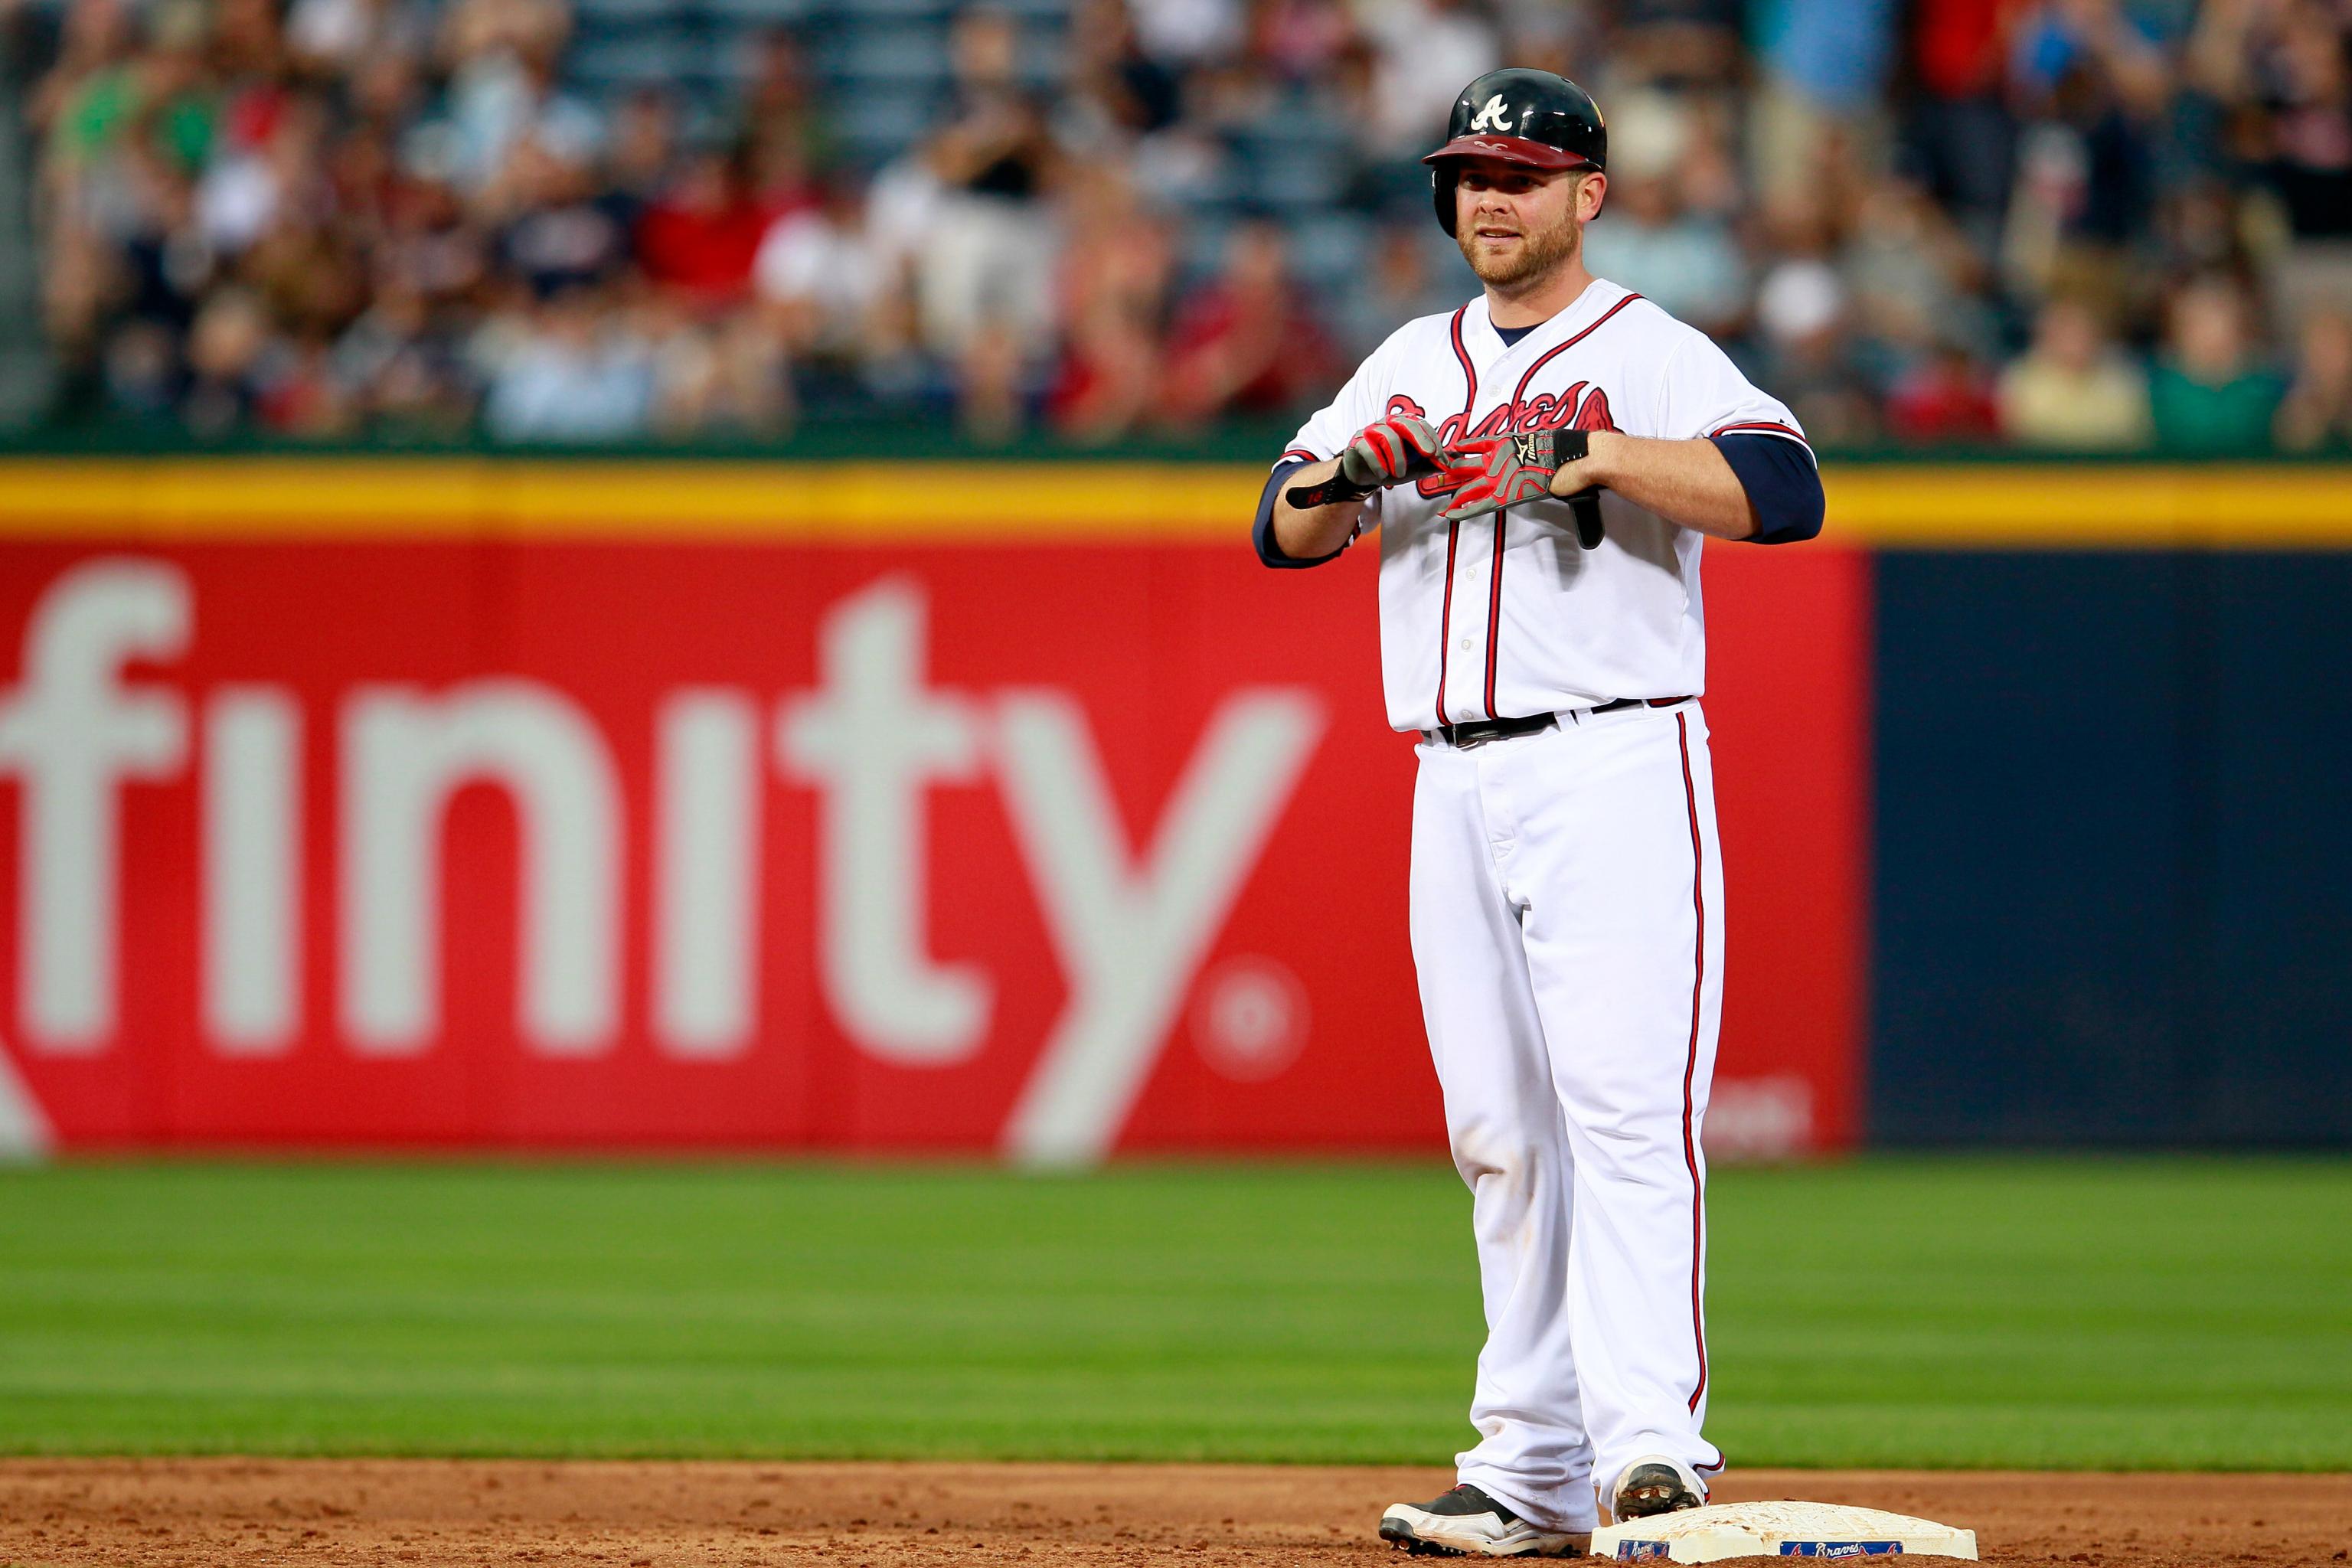 Braves place Gattis on disabled list with back injury